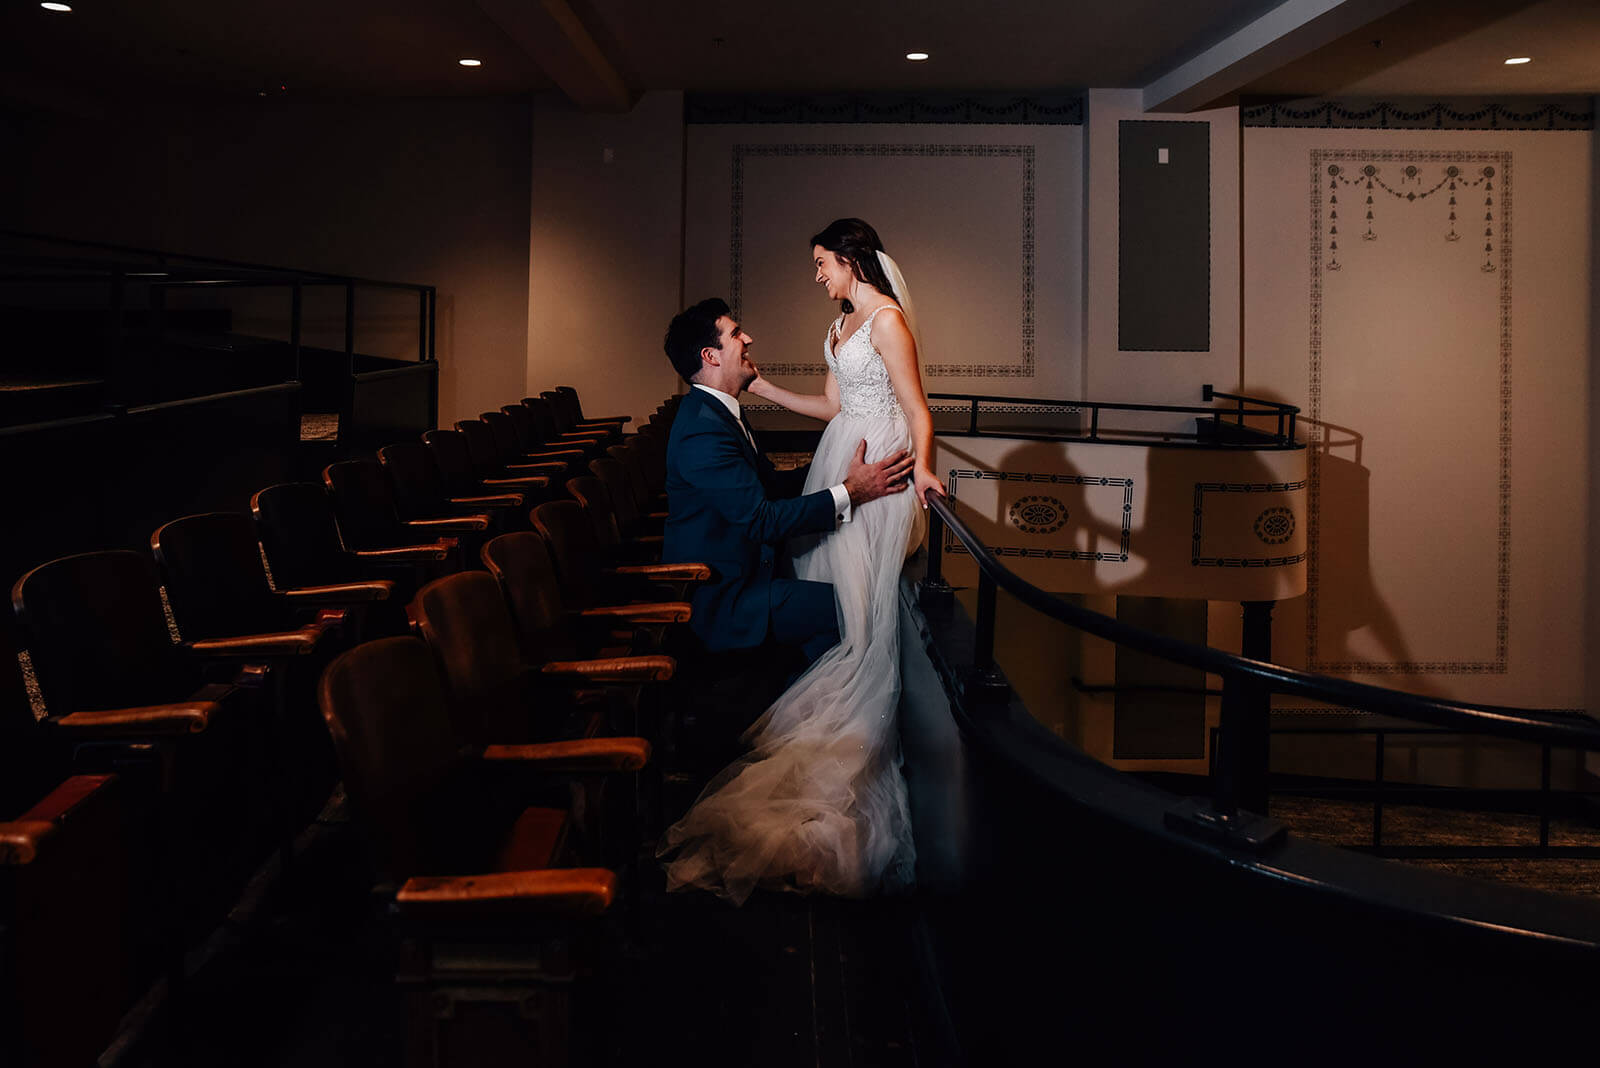 Bride and groom sharing a moment in the balcony of the Dawn Theater